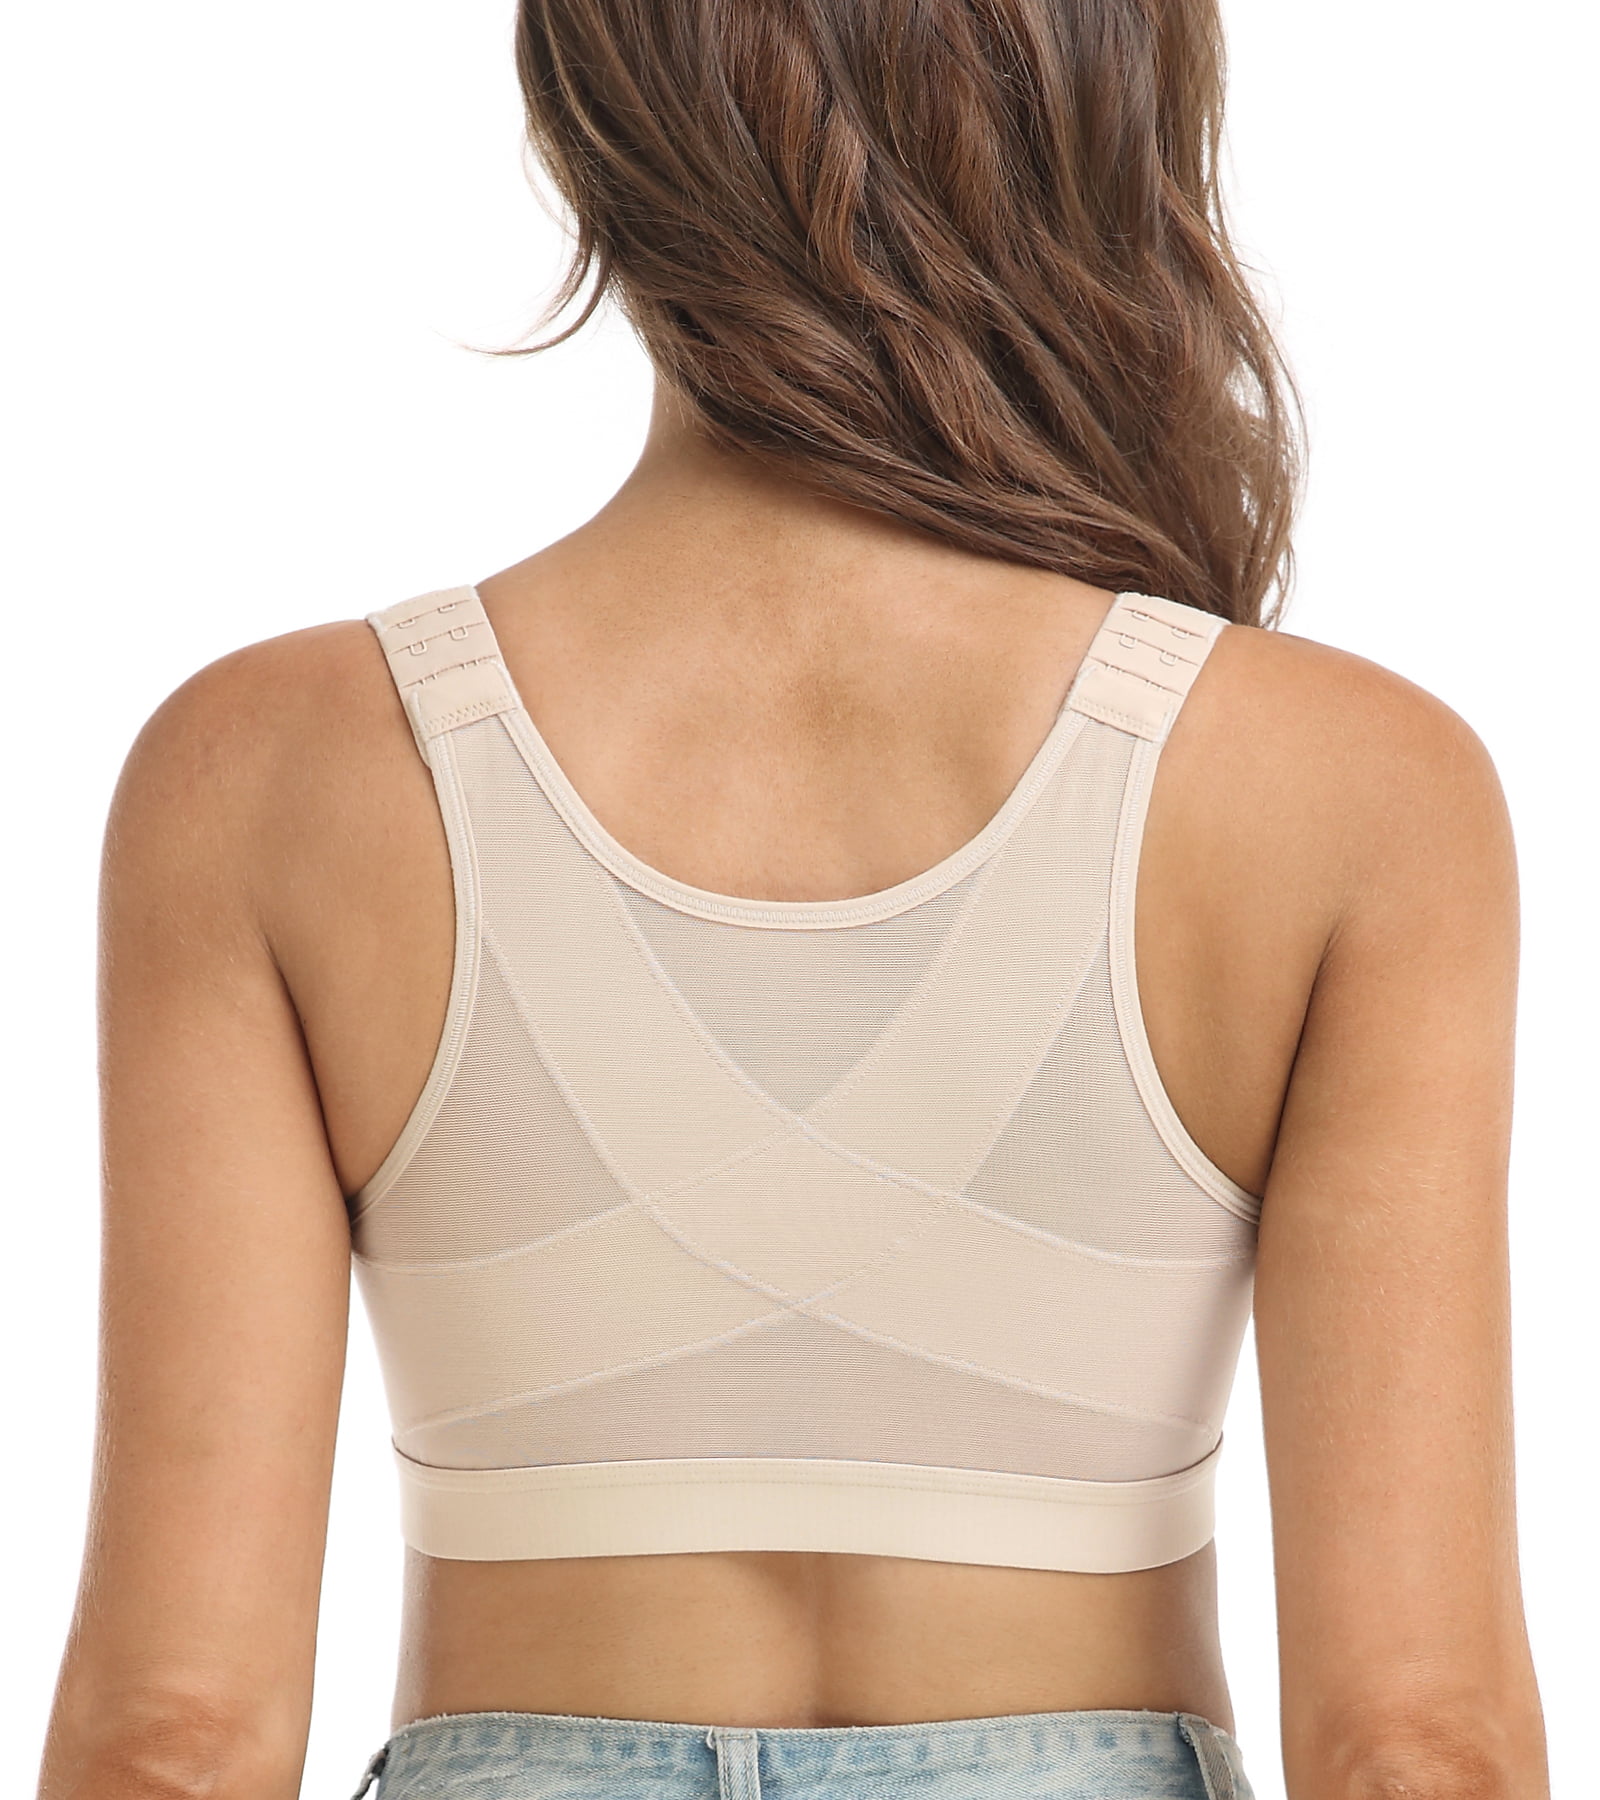 Exclare Women's Front Closure Full Coverage Wirefree Posture